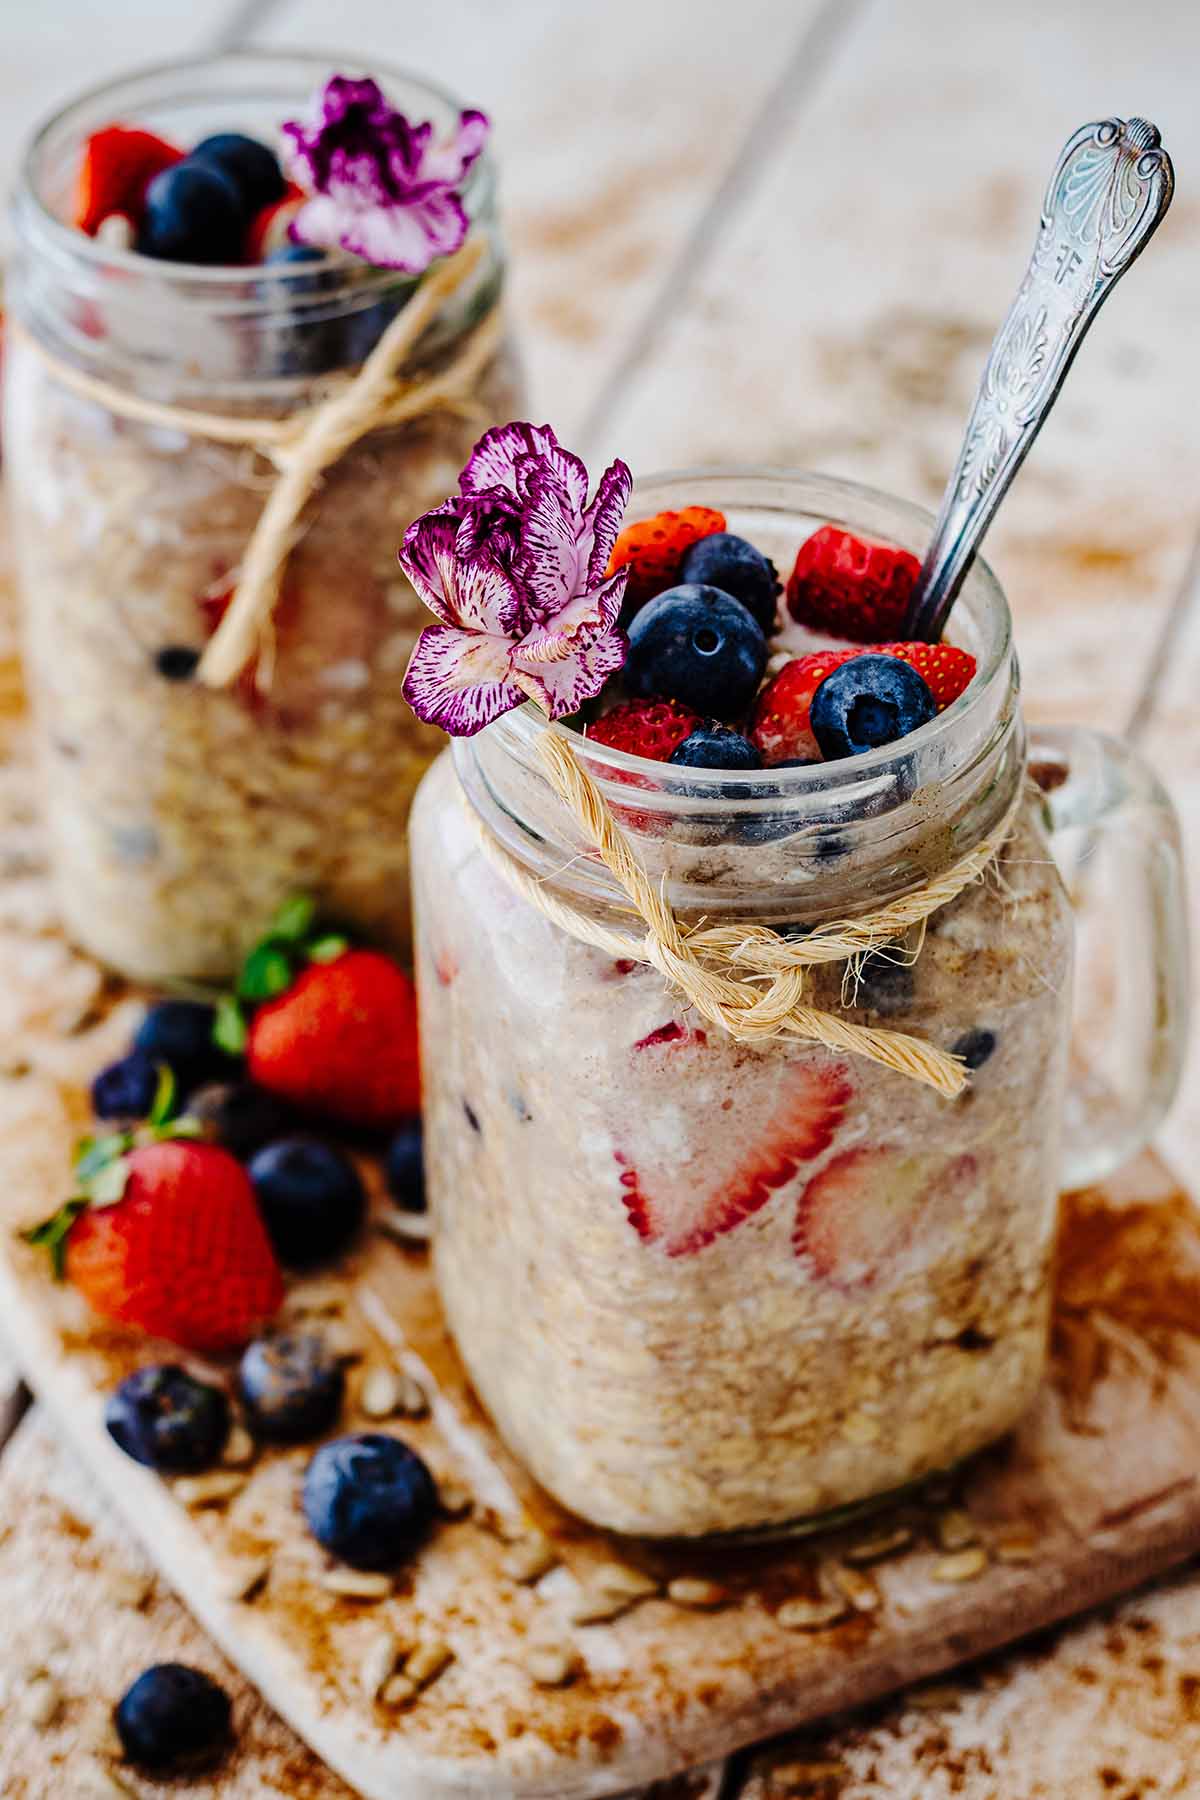 Two glass mug jars filled with overnight oats without milk topped with fresh berries and a mini purple and white carnation.